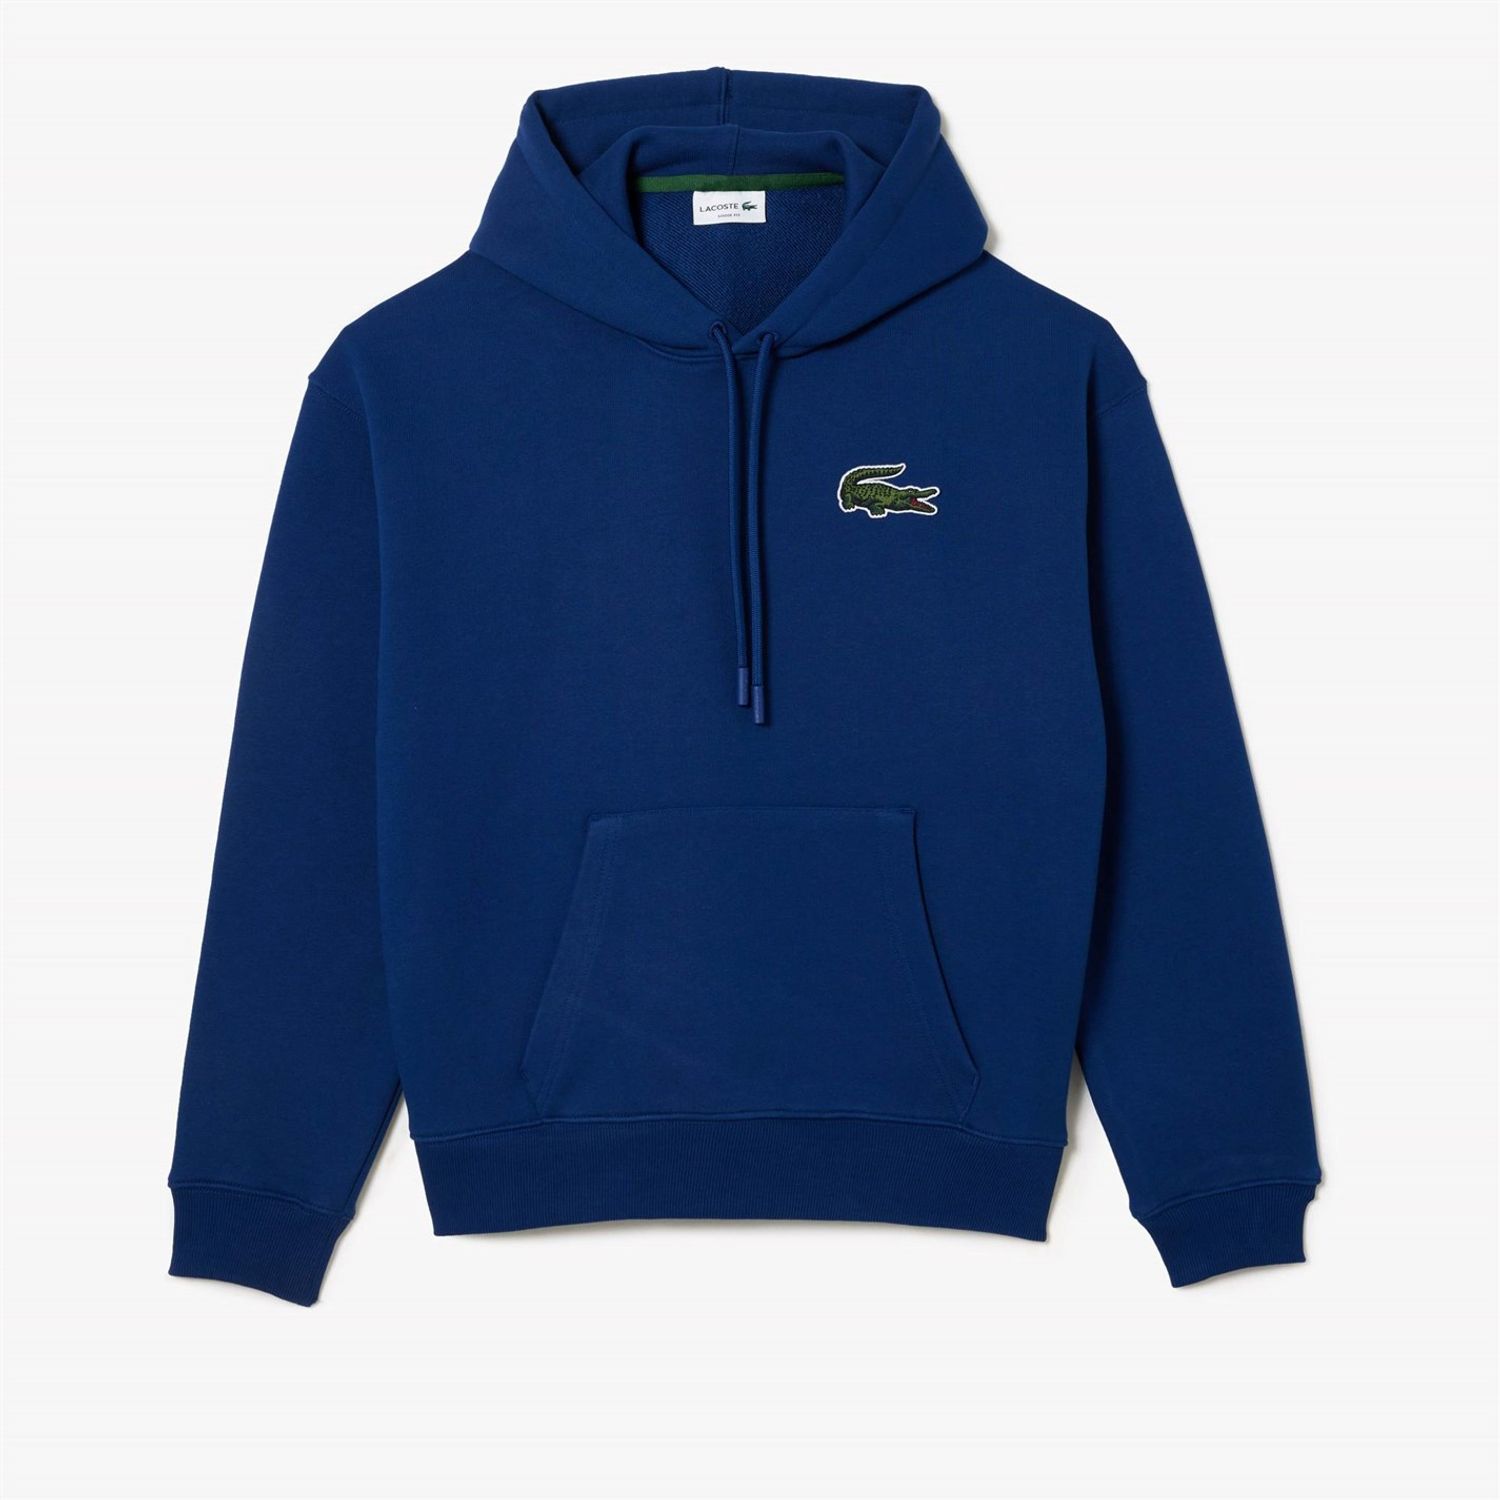 Blue Lacoste Rg Oth Hoodie - Get The Label